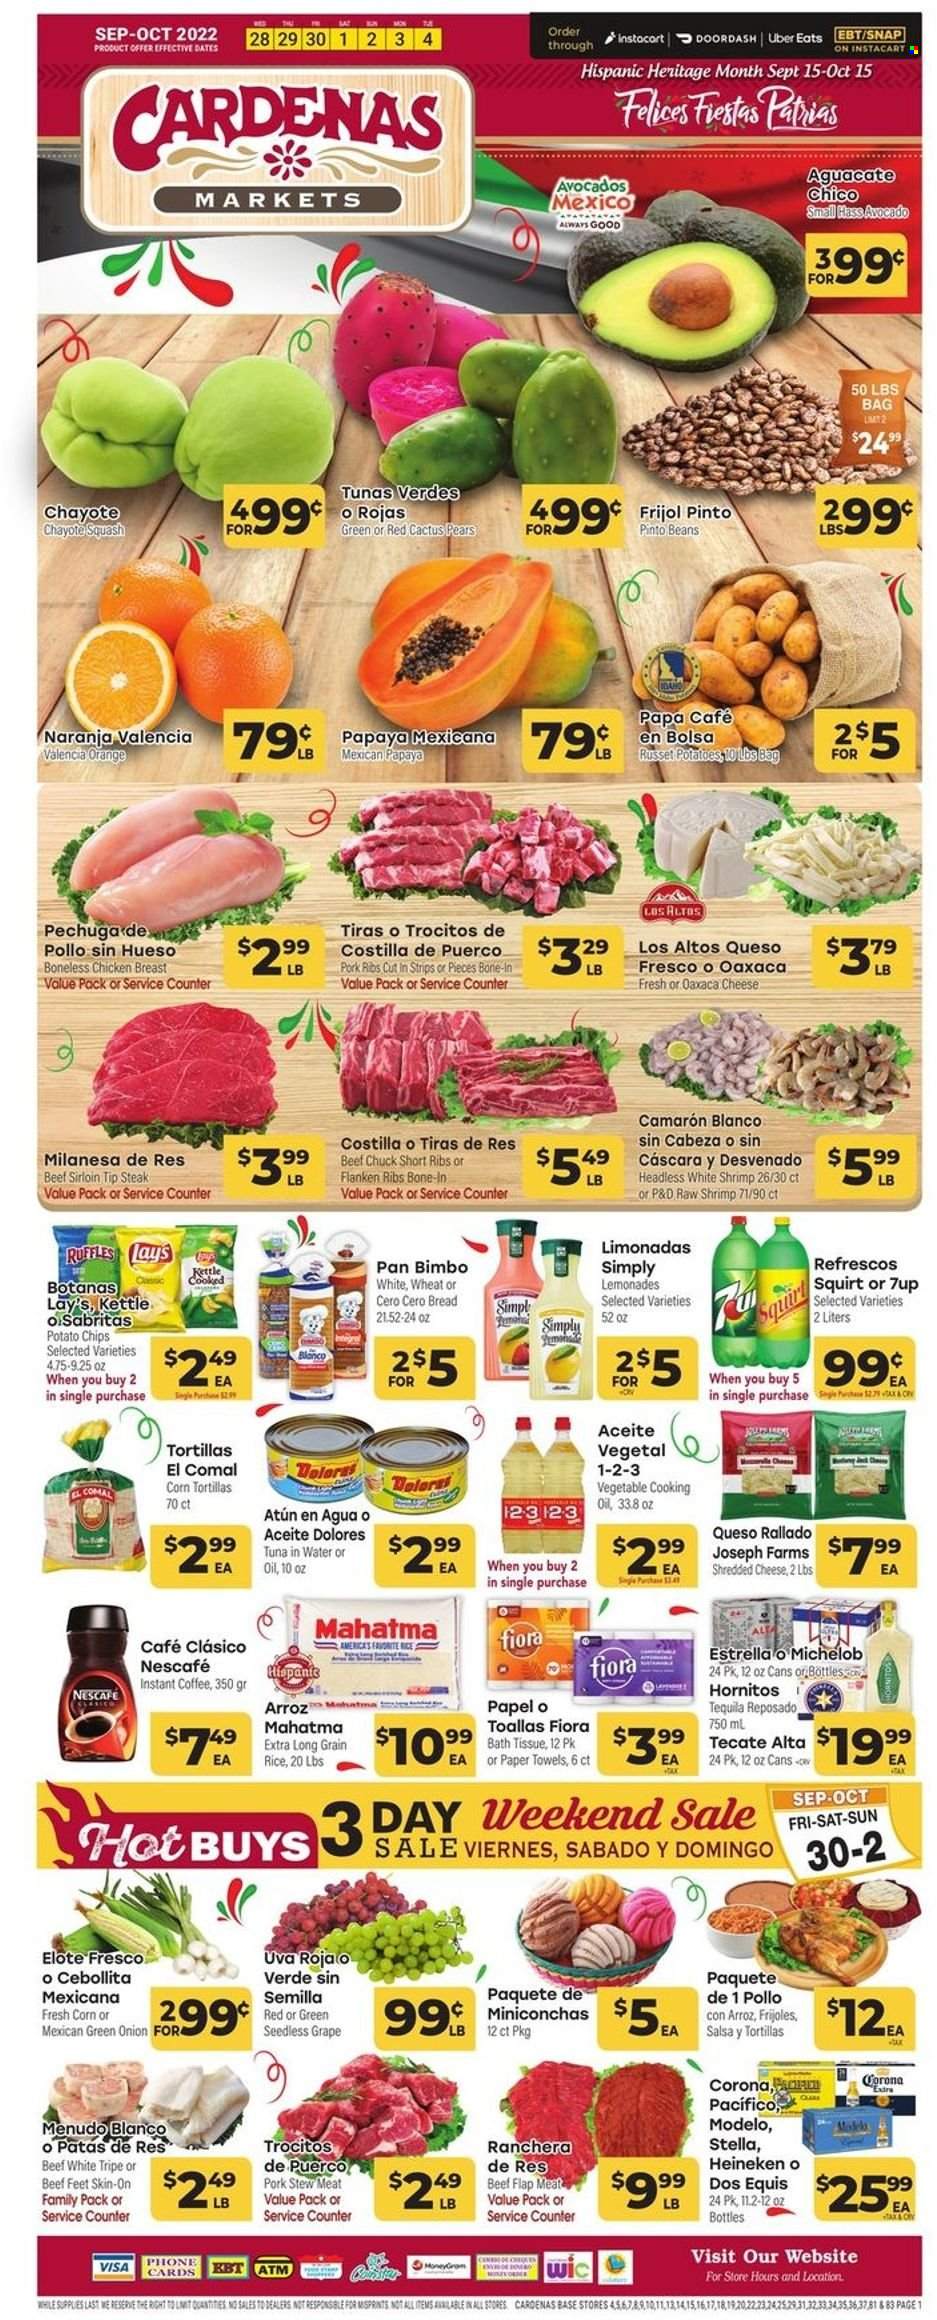 thumbnail - Cardenas Flyer - 09/28/2022 - 10/04/2022 - Sales products - stew meat, bread, corn tortillas, tortillas, russet potatoes, green onion, chayote squash, avocado, papaya, pears, oranges, chayote, tuna, shrimps, shredded cheese, queso fresco, strips, potato chips, chips, Lay’s, Ruffles, tuna in water, pinto beans, rice, long grain rice, salsa, cooking oil, 7UP, instant coffee, Nescafé, tequila, beer, Corona Extra, Heineken, Modelo, chicken breasts, beef meat, beef sirloin, steak, pork meat, pork ribs, bath tissue, kitchen towels, paper towels, pan, cactus, Michelob. Page 1.